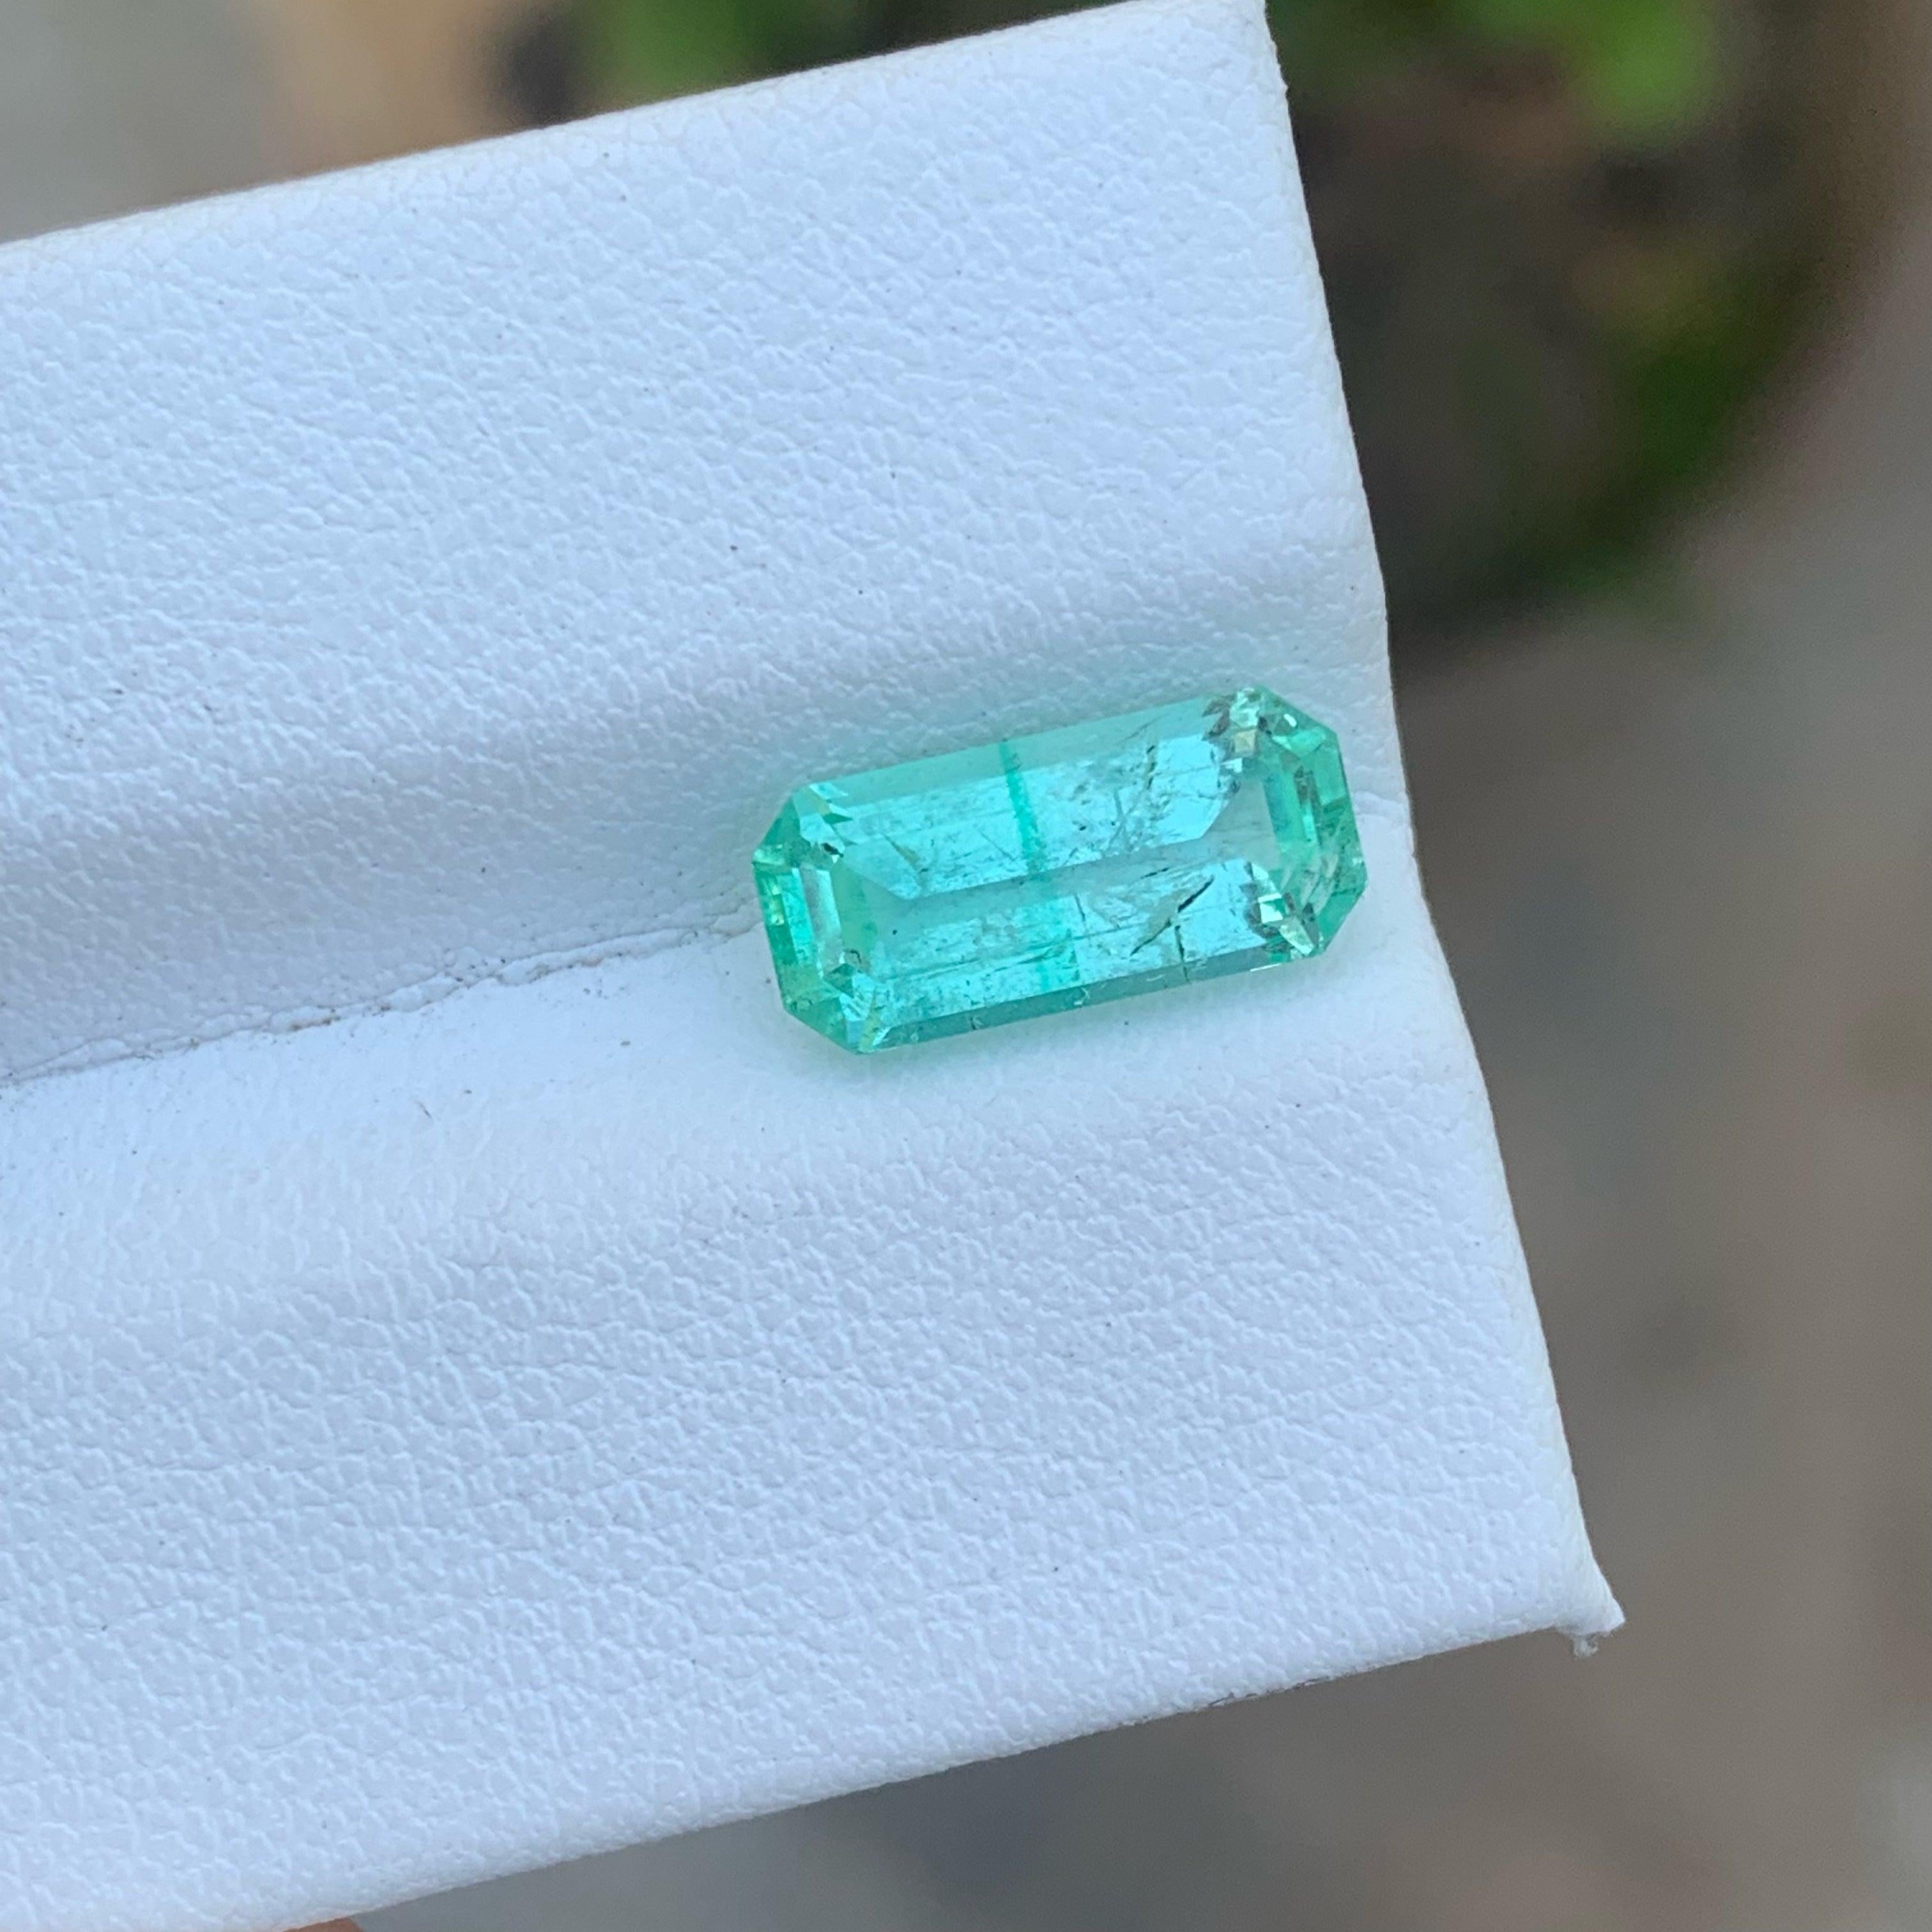 Natural Light Green Emerald Gemstone, Available For Sale At wholesale Price Natural High Quality Emerald Cut, 2.50 Carats Loose Emerald from Afghanistan.

Product Information:
GEMSTONE TYPE: Natural Light Green Emerald Gemstone
WEIGHT: 2.50